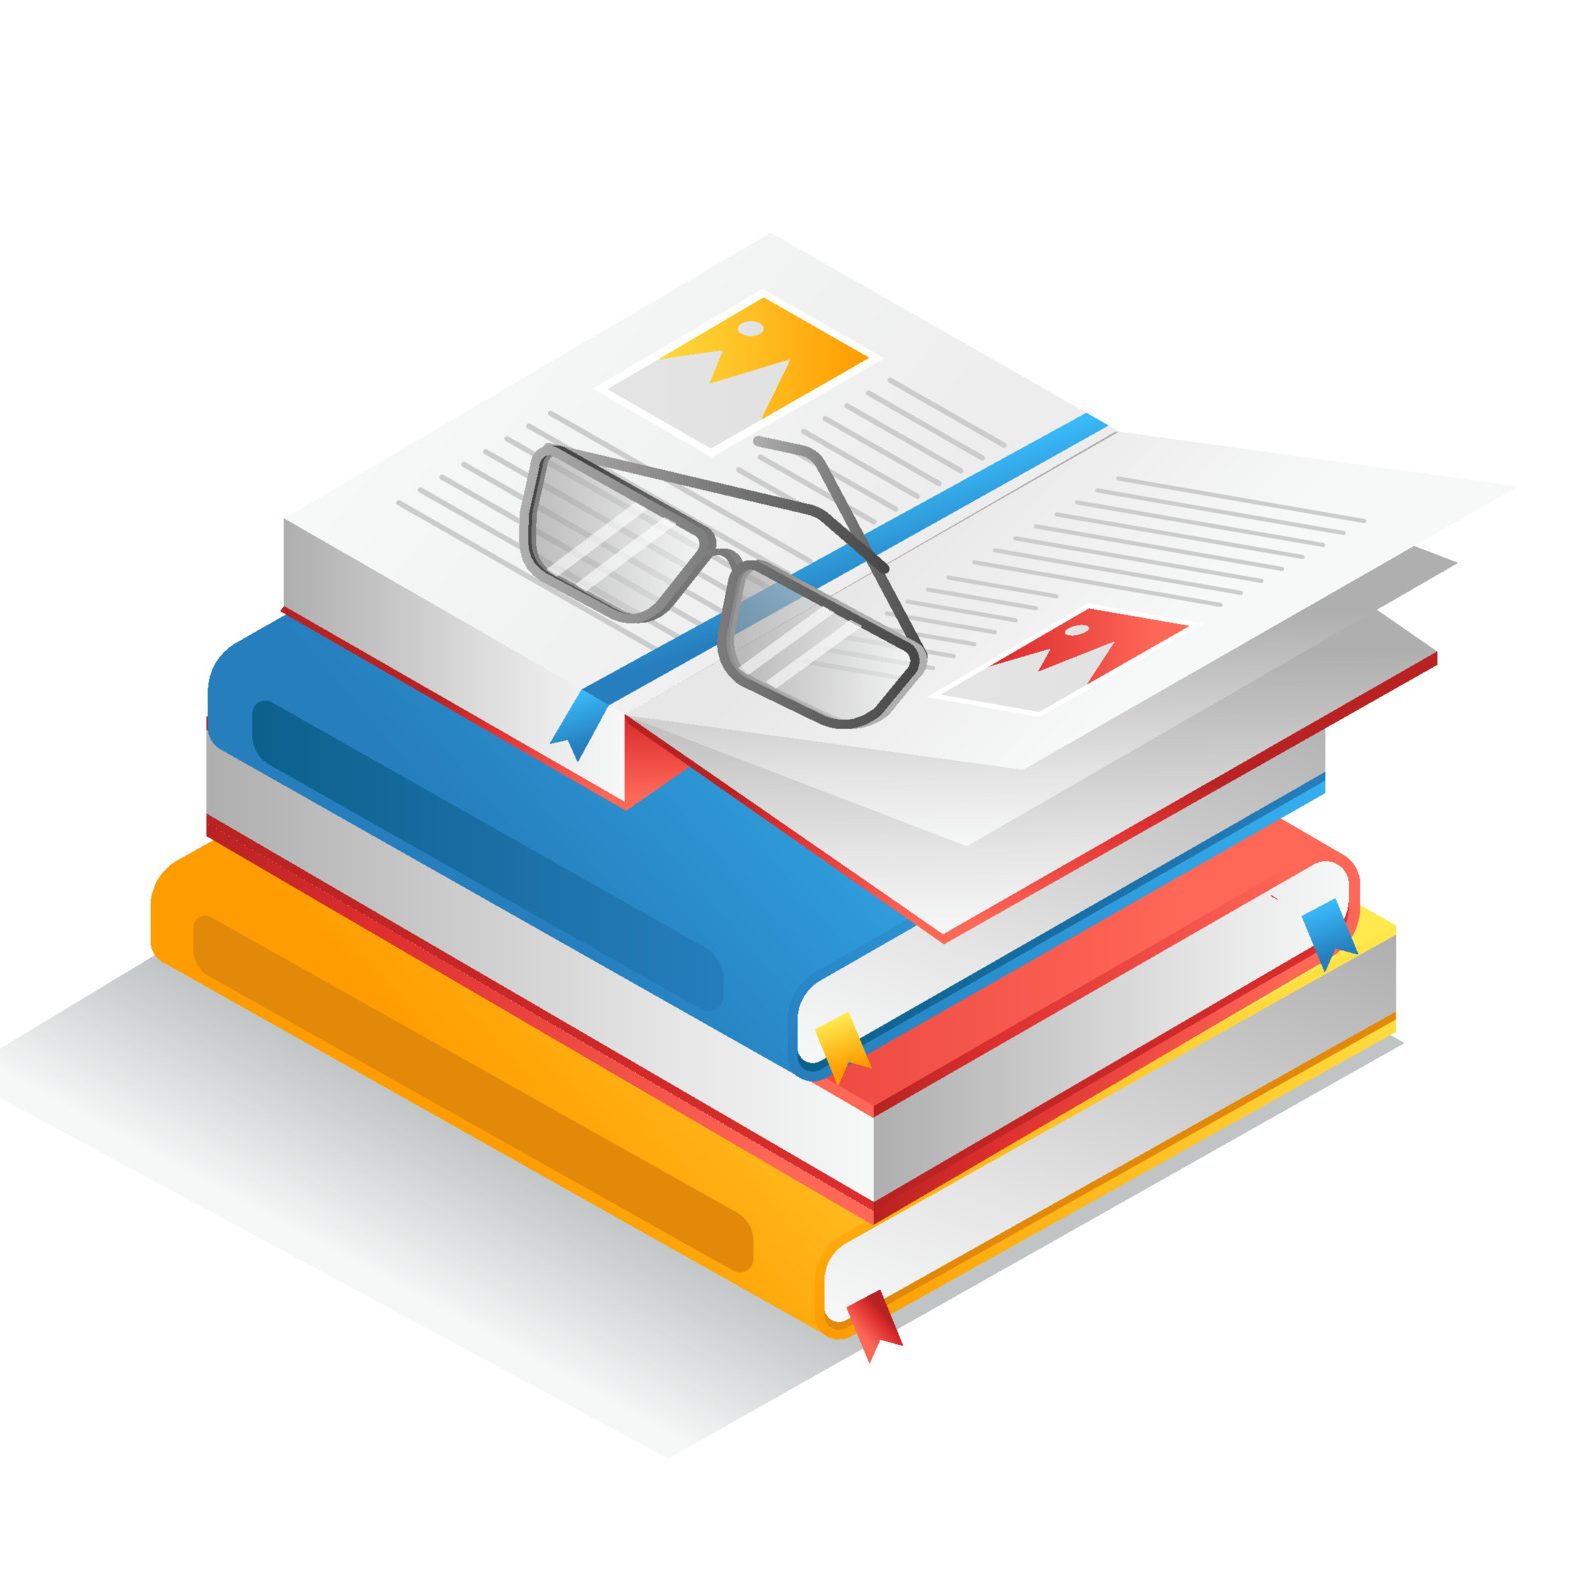 Flat isometric illustration concept. glasses on a pile of student books